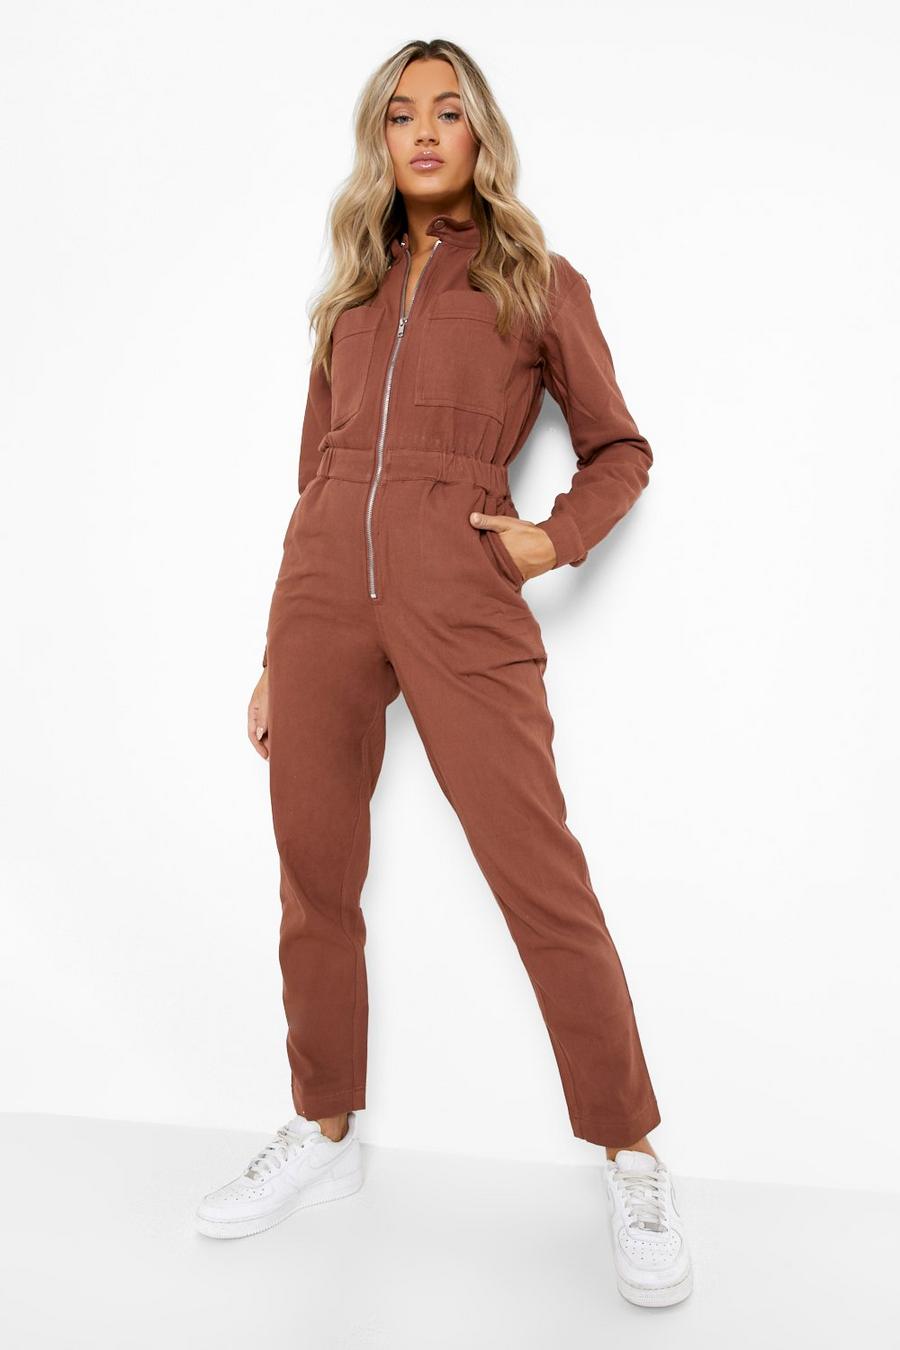 Boohoo Denim Cord Boilersuit in Chocolate Womens Clothing Suits Trouser suits Brown 